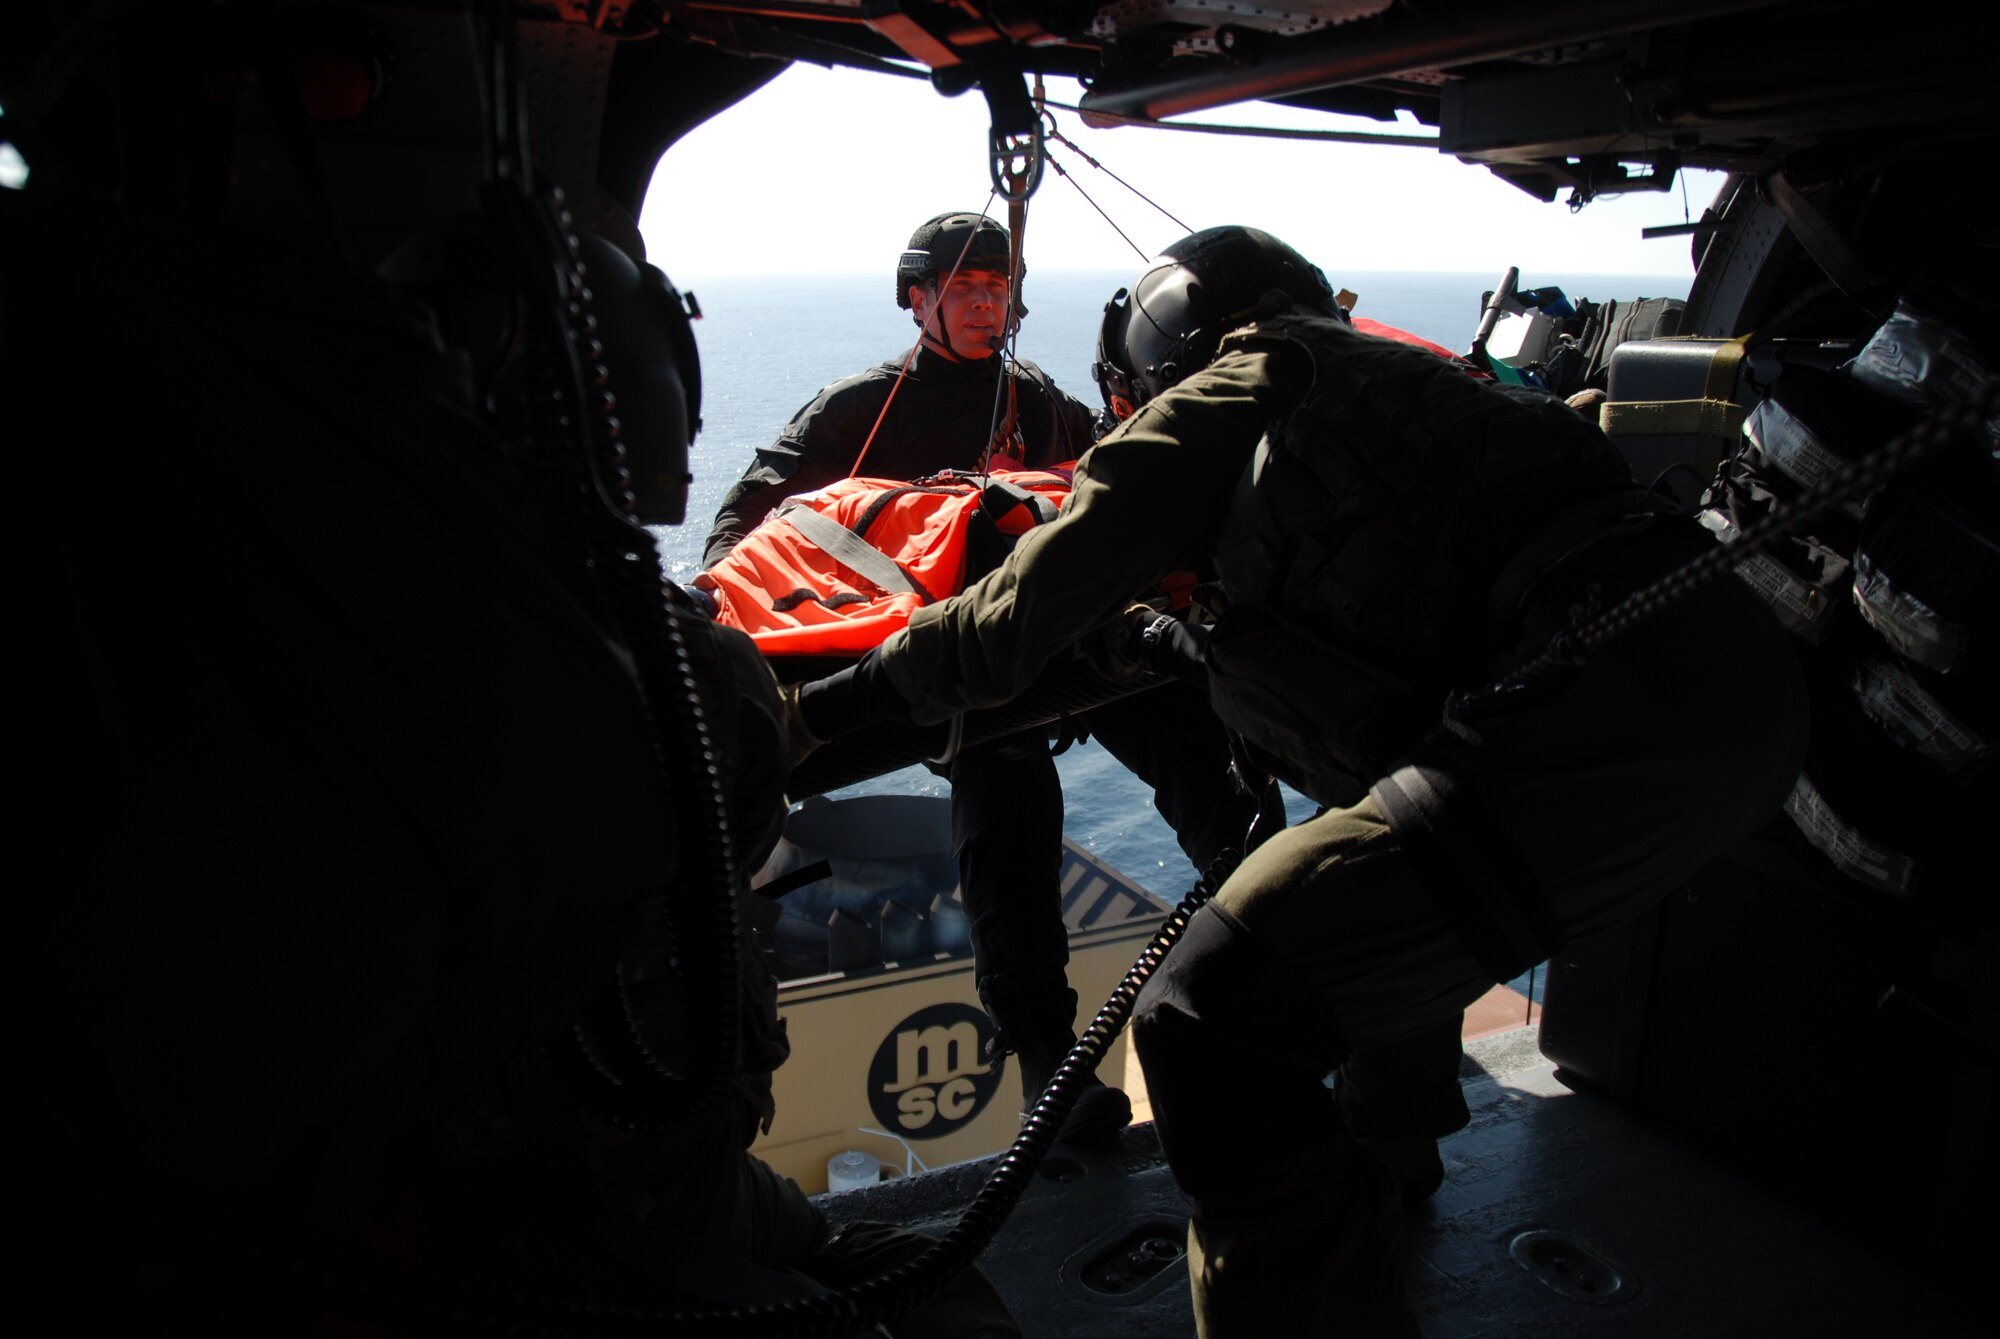 Tech. Sgt. Sean Pellaton, an aerial gunner assigned to the 129th Rescue Squadron, guides Staff Sgt. Adam Vanhaaster, a pararescueman assigned to the 131st Rescue Squadron, and his patient into the HH-60G Pave Hawk rescue helicopter Feb. 4, 2012. Responding to the call from the Eleventh District Coast Guard at Alameda, pararescuers, or PJs, two Pave Hawks and one MC-130P Combat Shadow aircraft departed Moffett Federal Airfield. The team provided medical assistance to a 54-year-old male who had suffered stroke-like symptoms on the MSC Beijing, acargo ship more than 200 miles off the coast of California. Guardsmen air lifted the patient to the San Jose Regional Medical Center. (Air National Guard photo by Senior Airman Jessica Green)